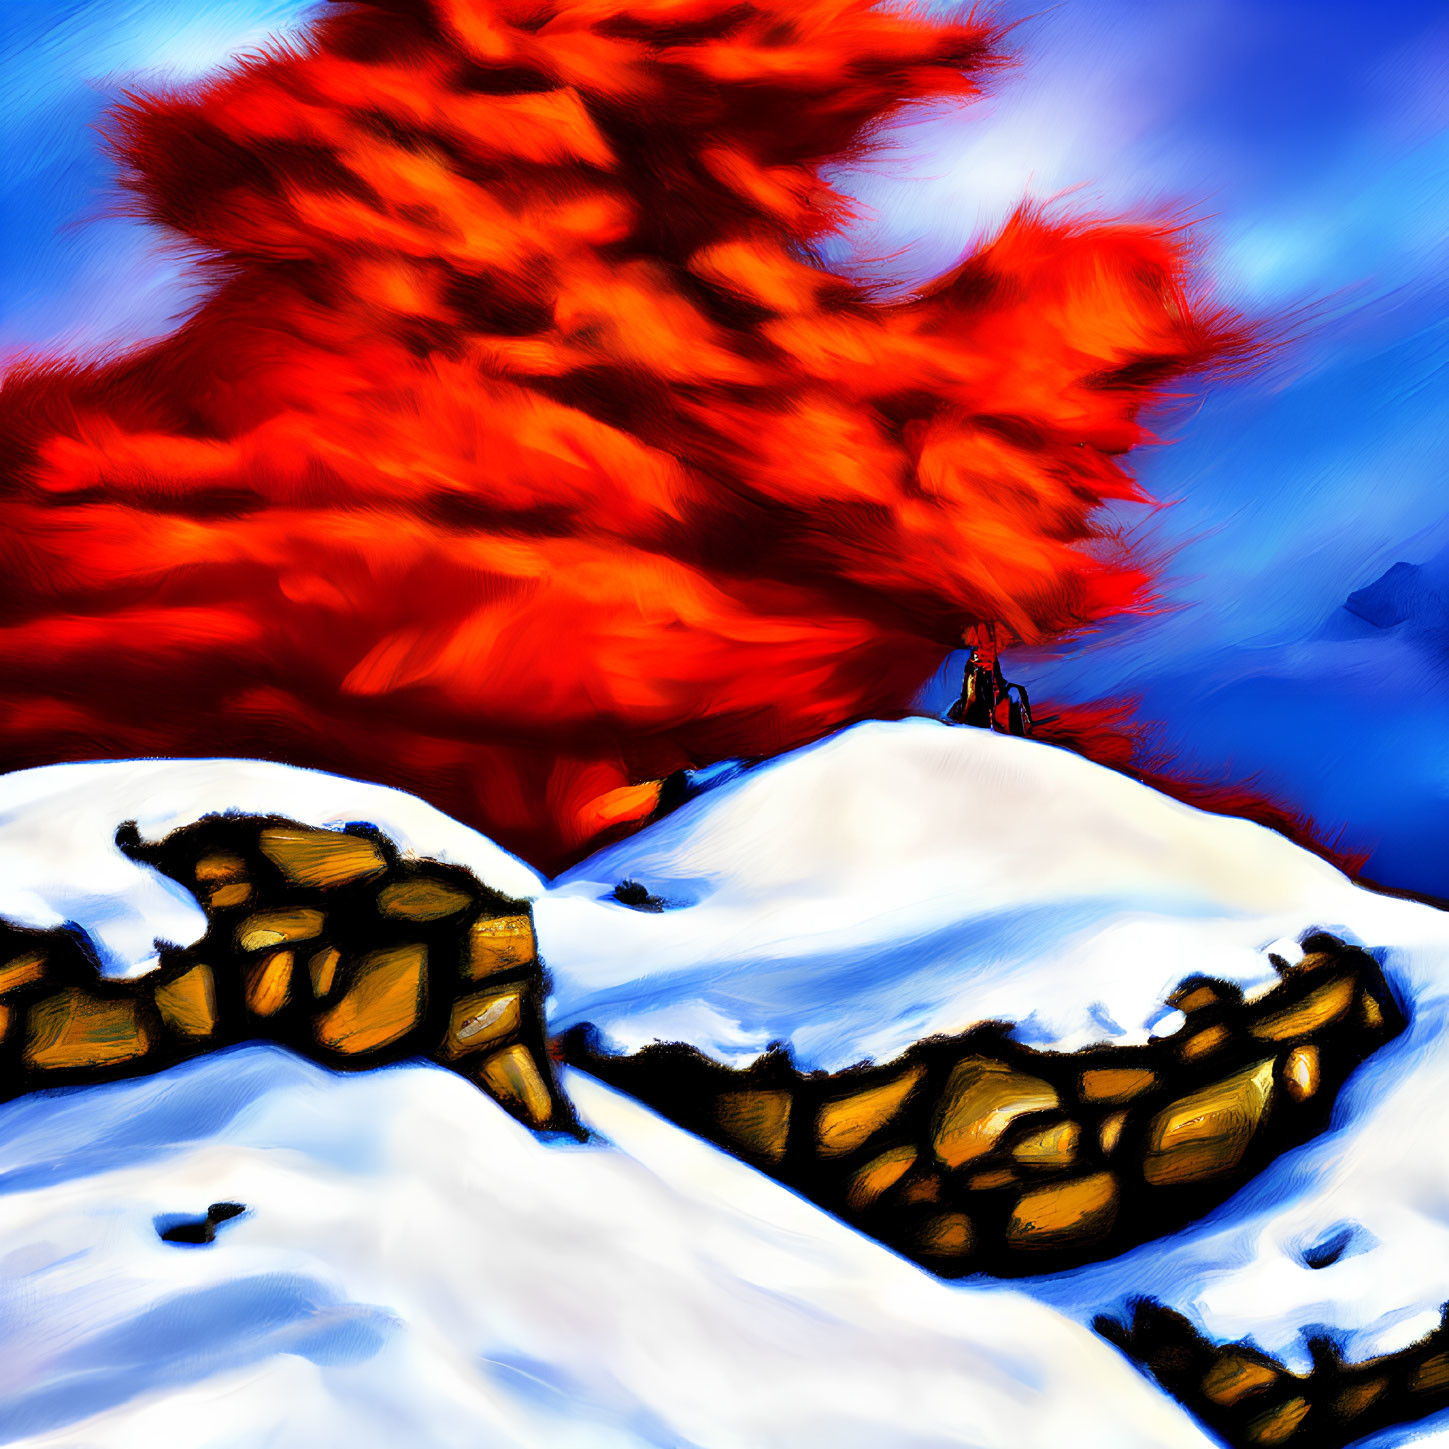 Colorful painting of red tree in snowy landscape with person and blue skies